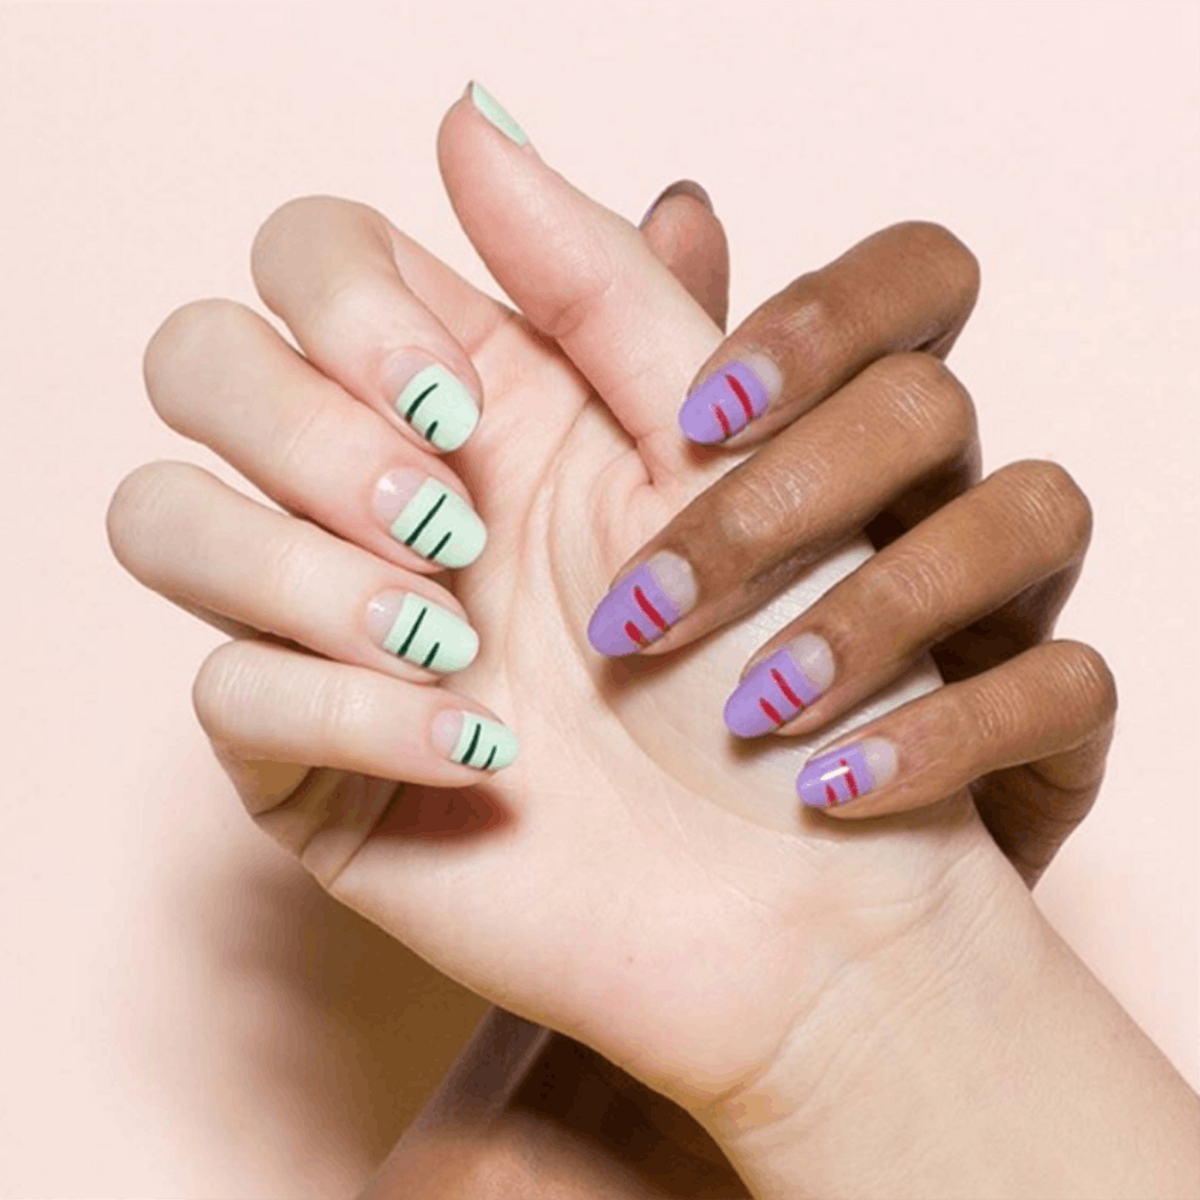 8 Negative Space Manis That Are Perfect for Spring